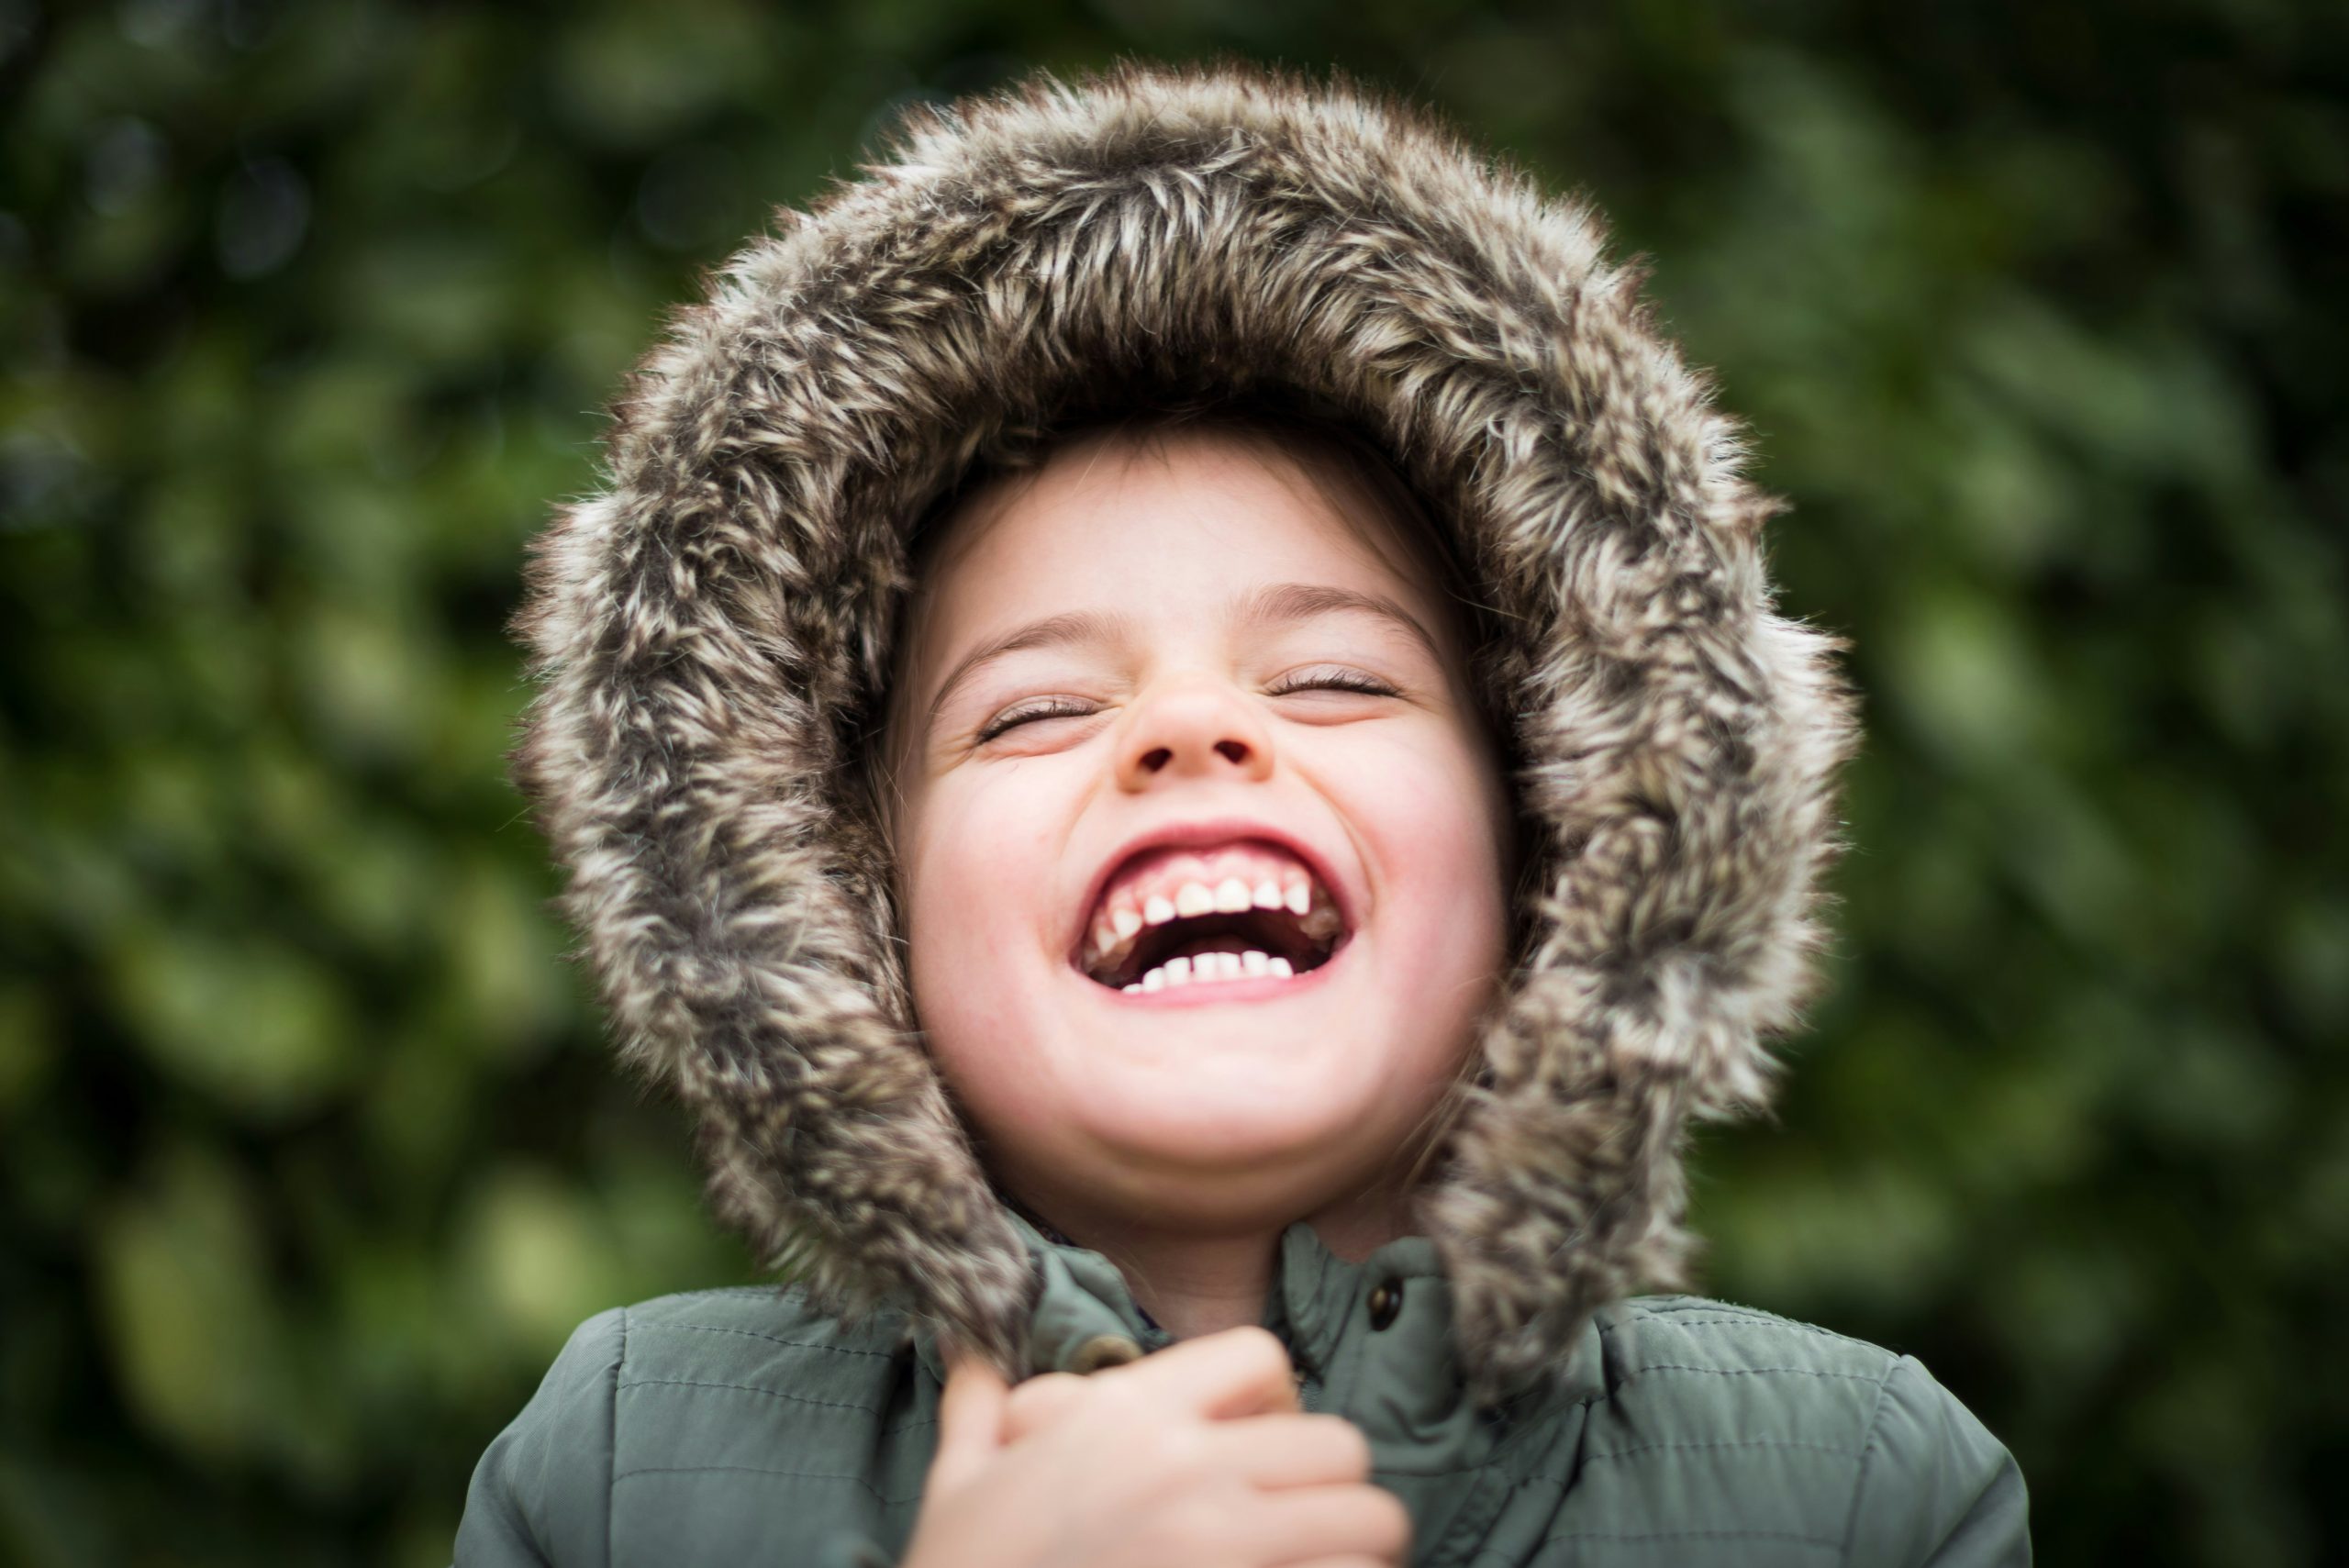 Child laughing with many teeth showing.